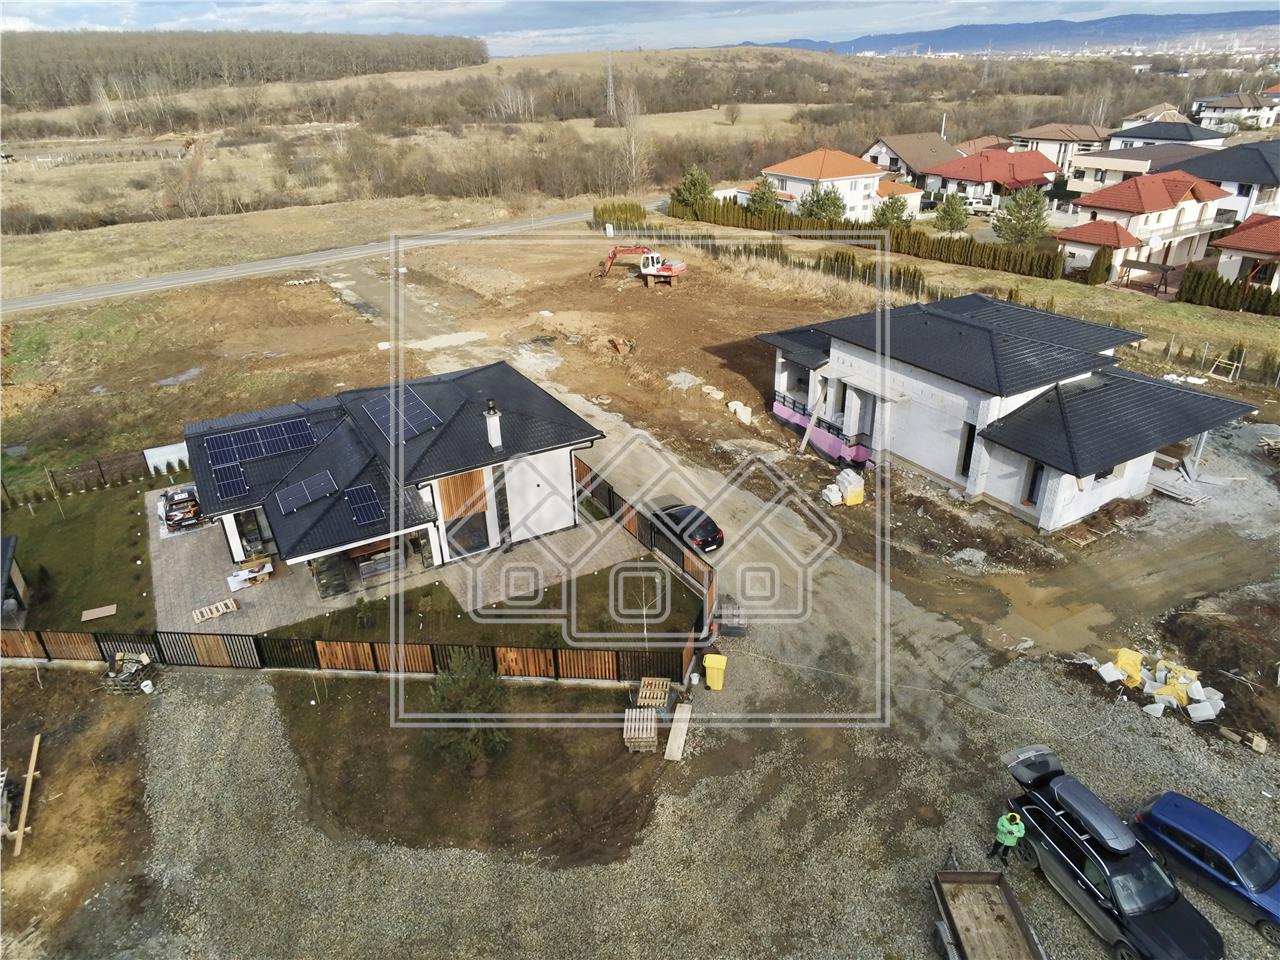 Residential complex of houses on one level - Selimbar - Sibiu Real Estate